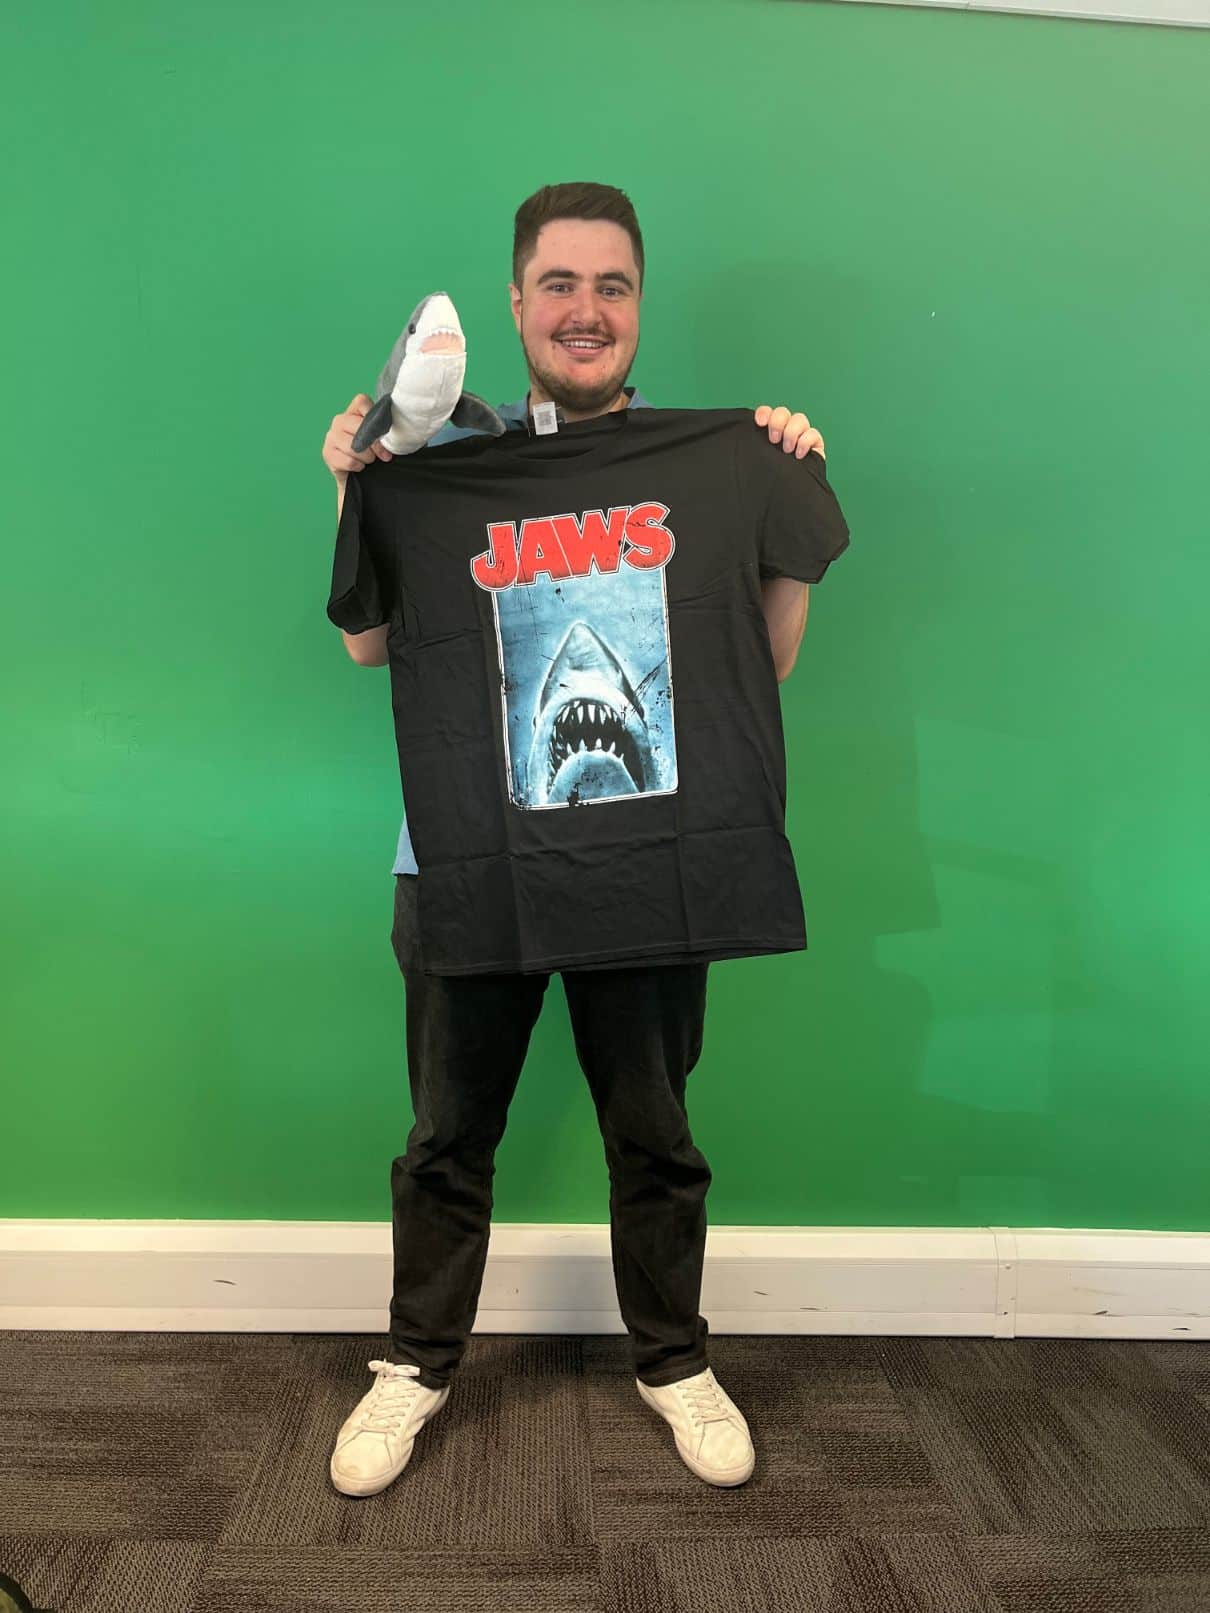 Team member, Will, holding a stuffed shark and a Jaws movie t-shirt.